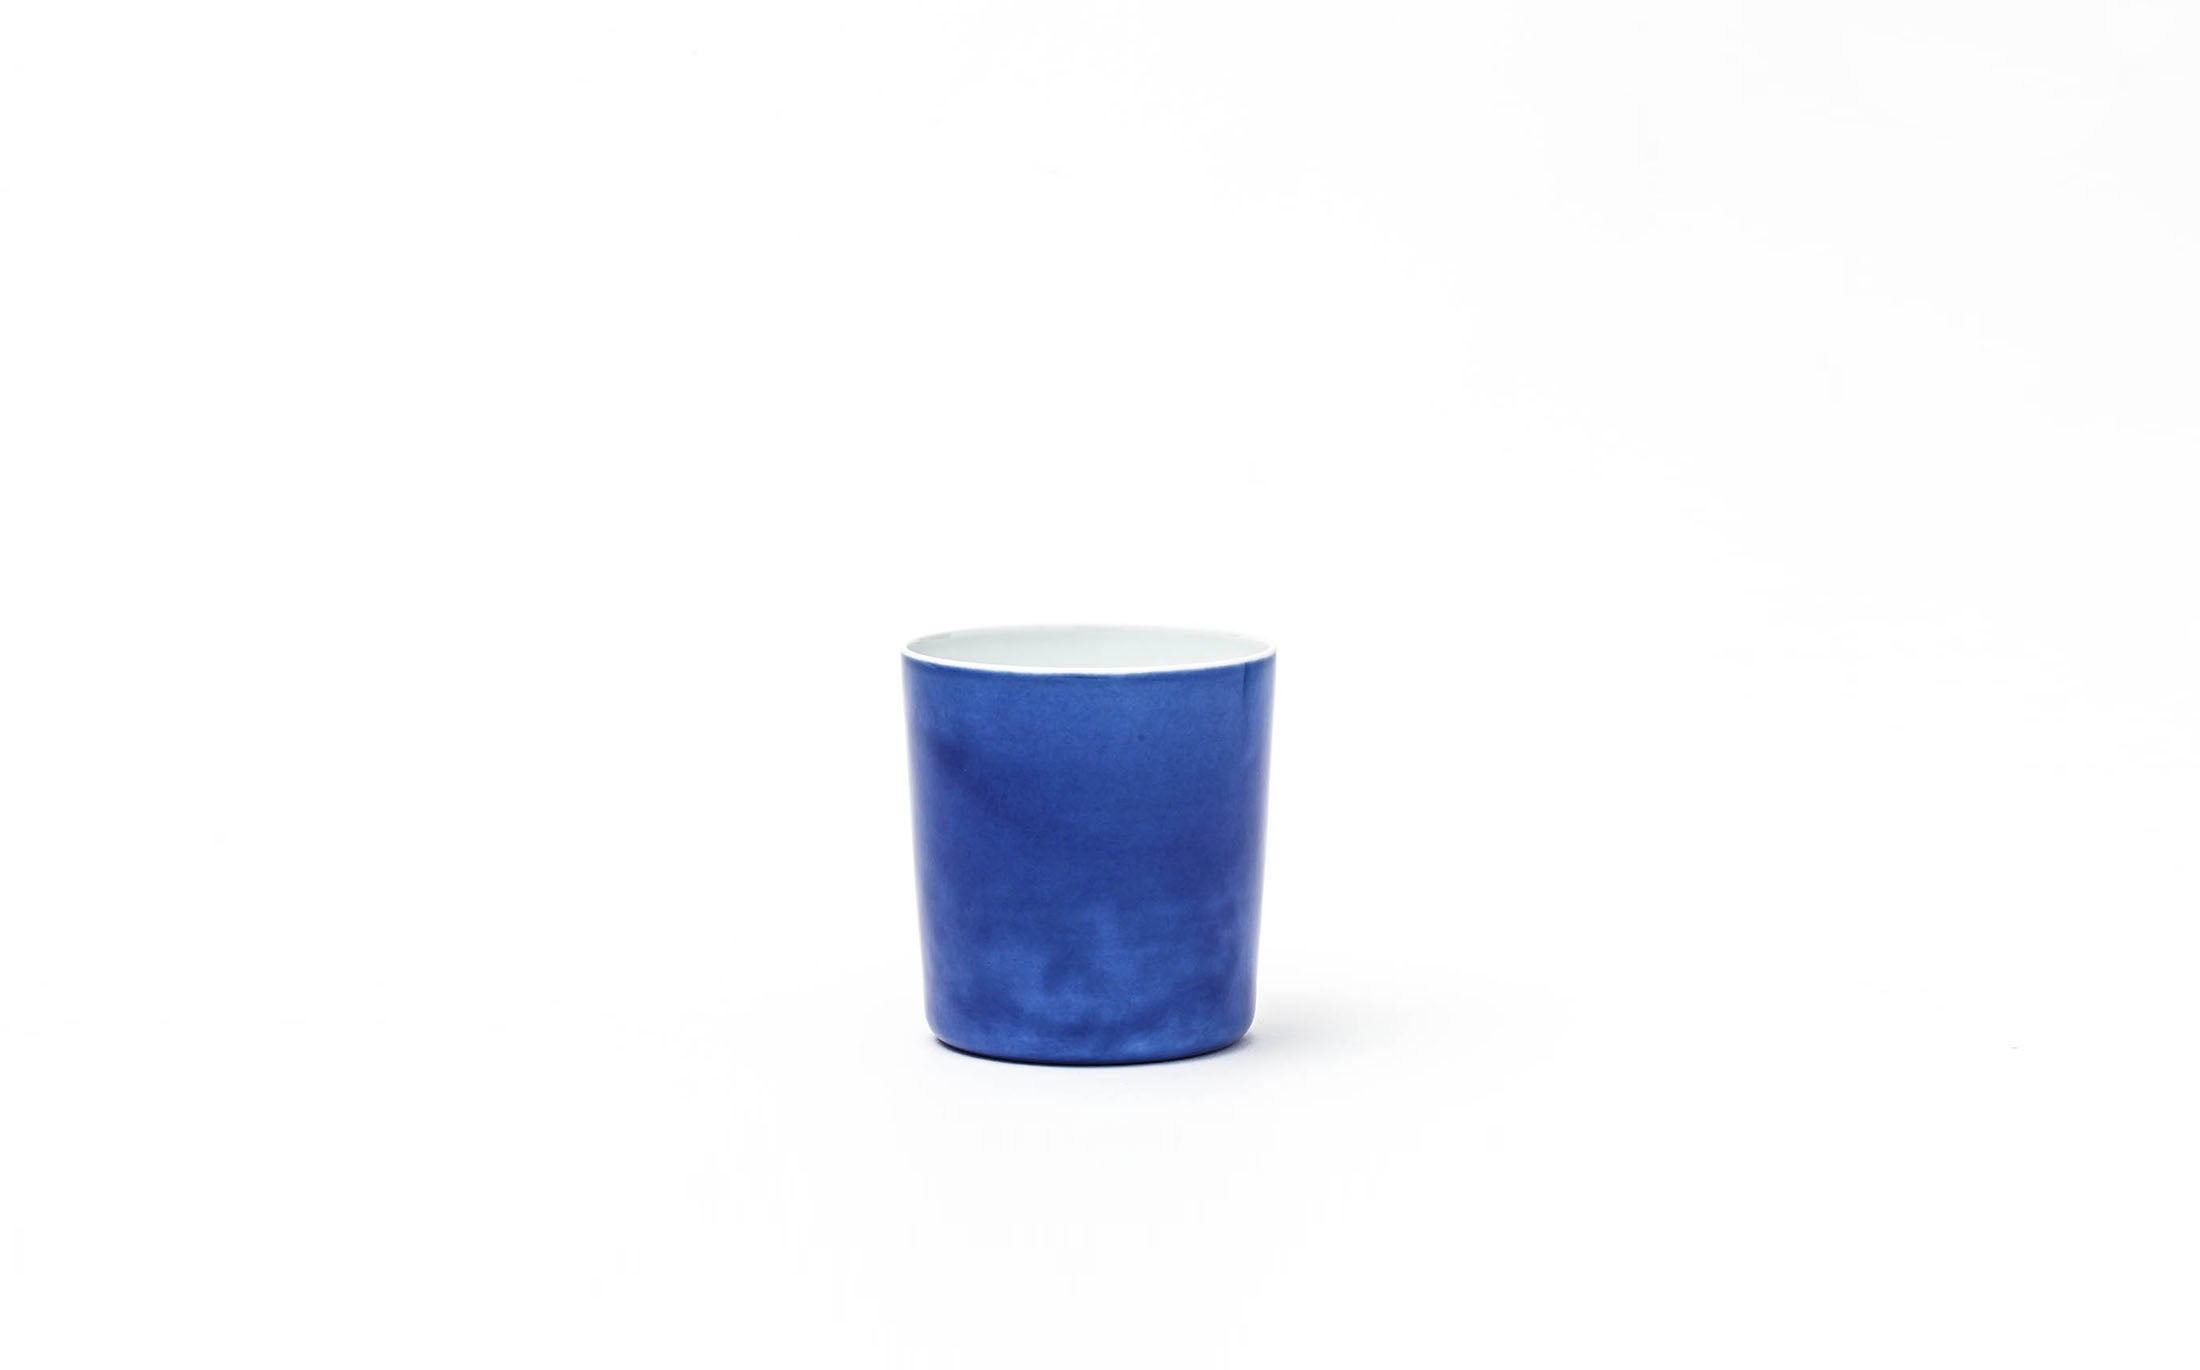 Hiya - Porcelain Overall Blue - Cup "Water"